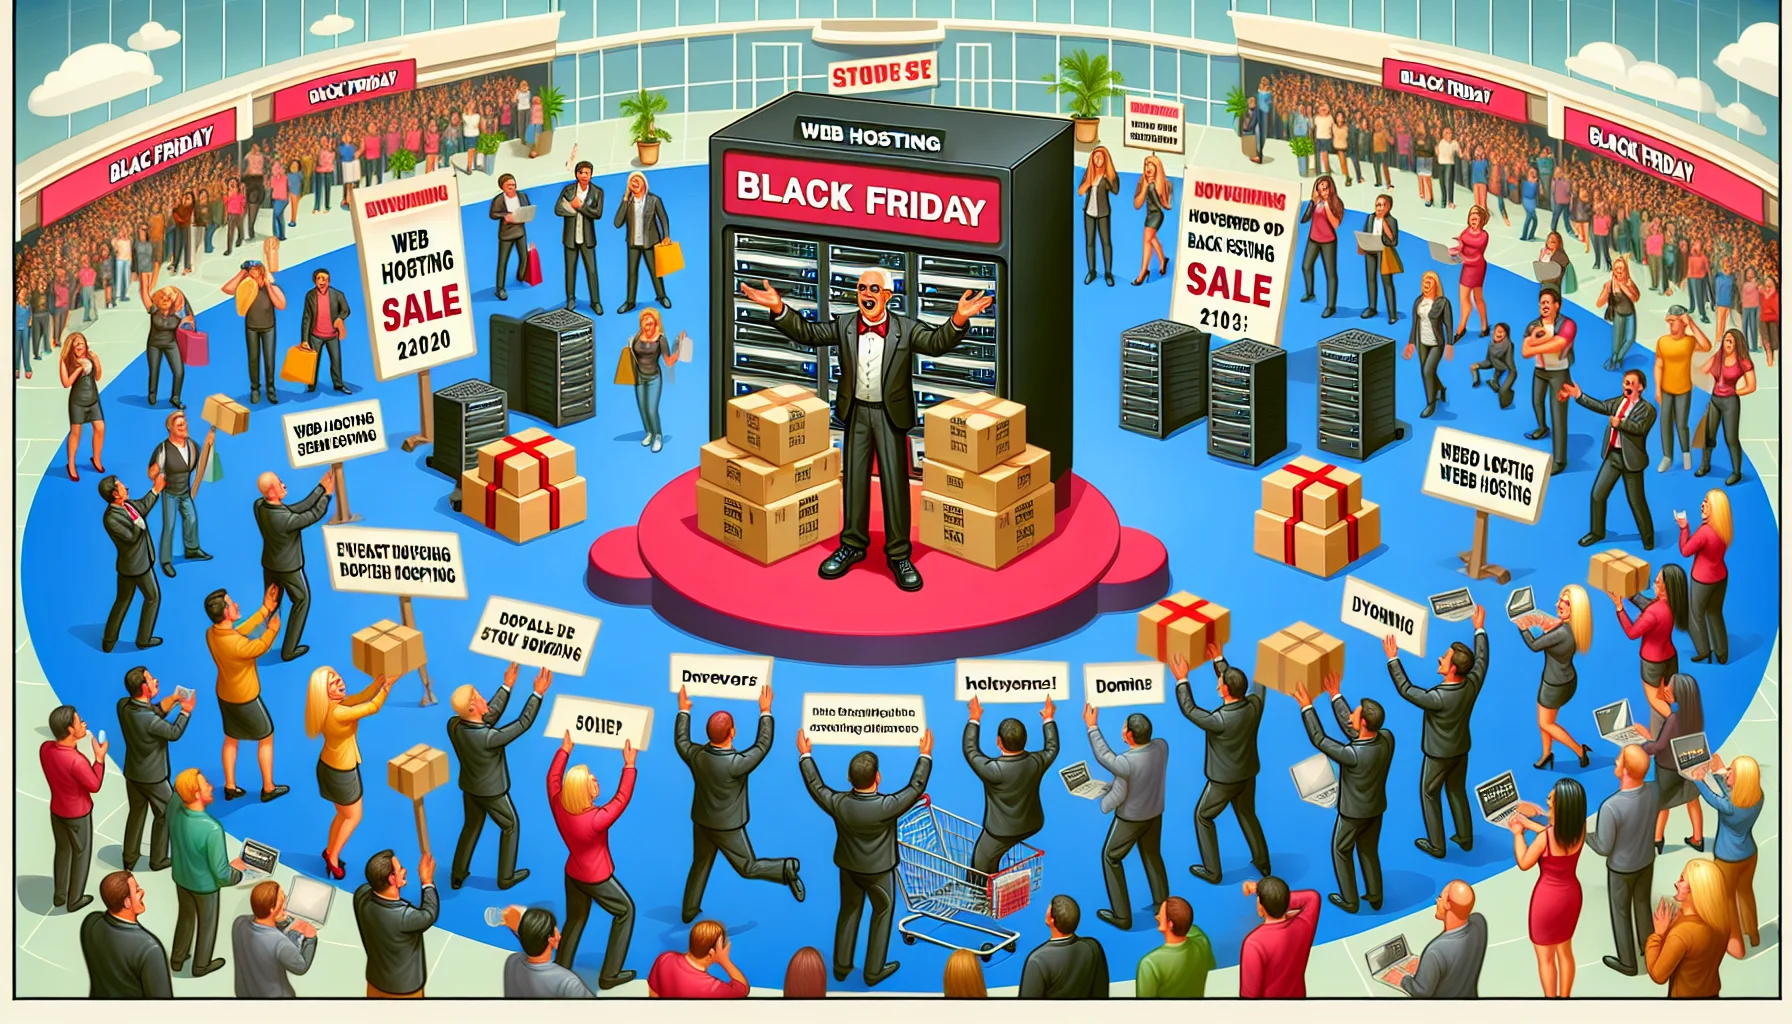 Envision a humorous scenario portraying a grand event for a web hosting sale taking place during Black Friday of 2020. Incorporate elements such as enthusiastic customers, over-the-top promotional advertising and chaotic shopping scenes indicative of the frenzy usually associated with Black Friday sales. Ensure to reflect a positive atmosphere representing the aspect of enticing deals available on this day, while subtly infusing elements of the digital industry such as computer servers, domains, HTML coding etc. to represent the web hosting theme.